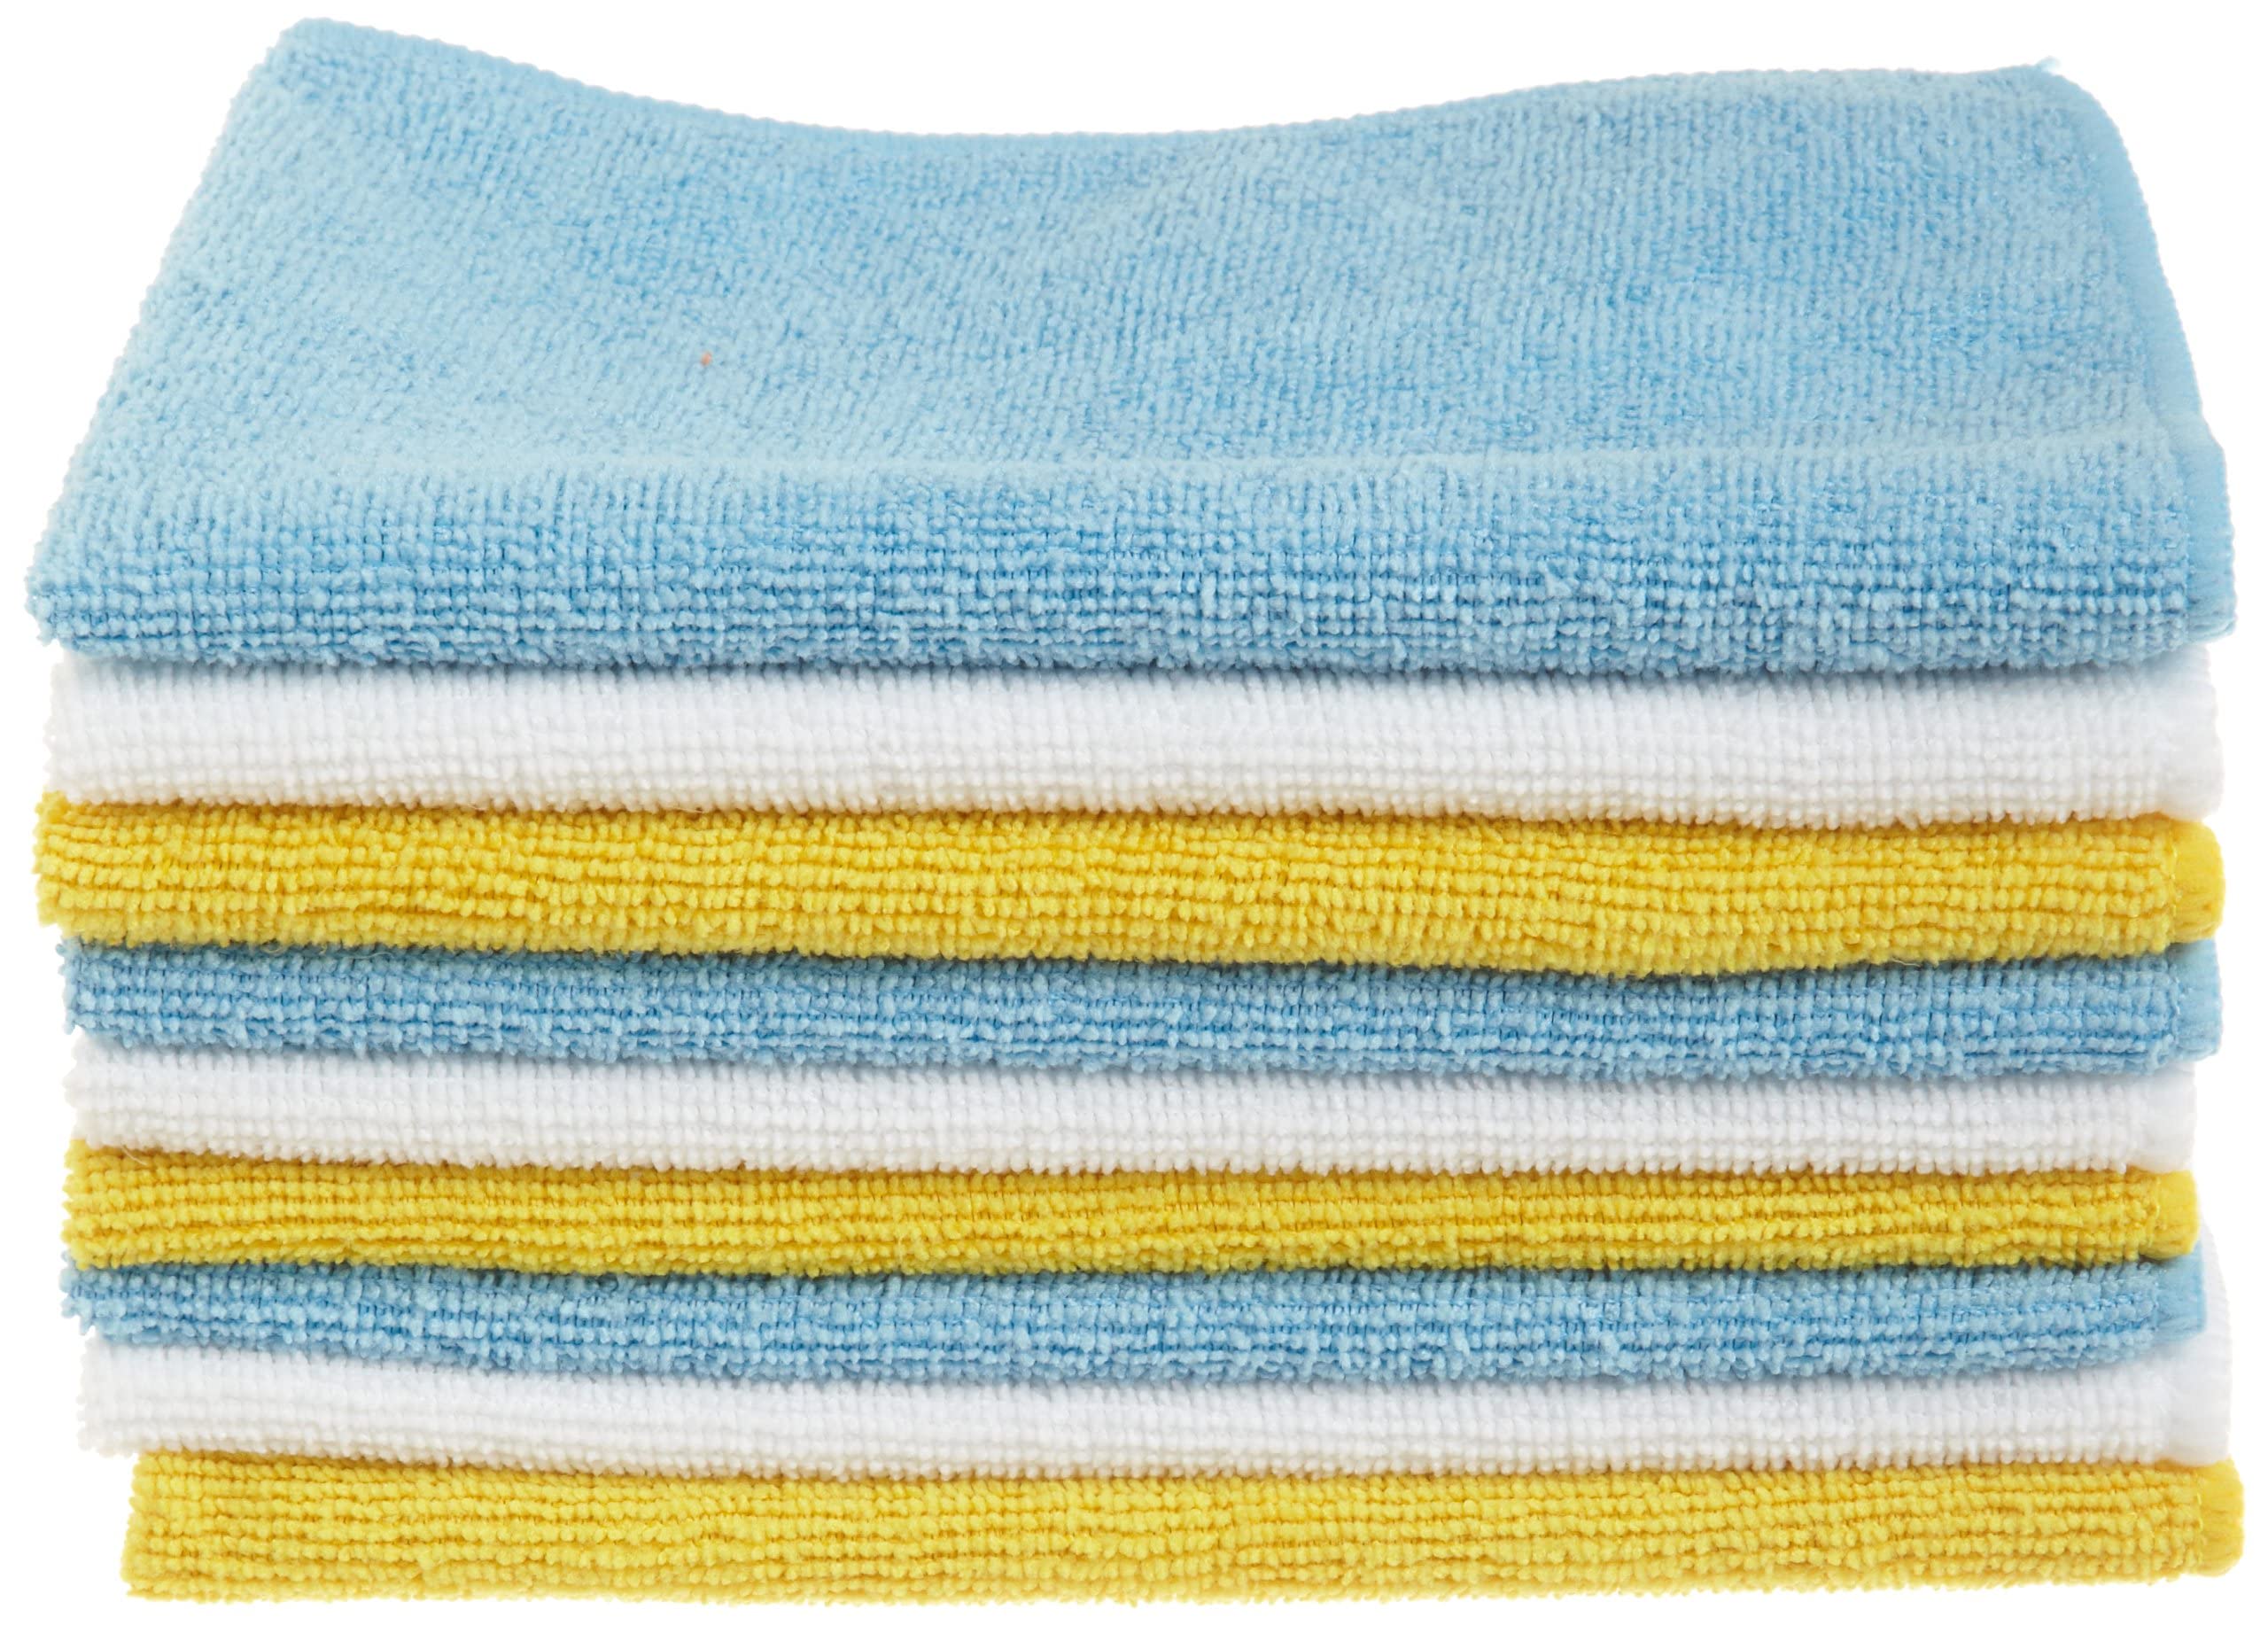 Amazon Basics Non-Abrasive Microfiber Cleaning Cloths for Home and Auto